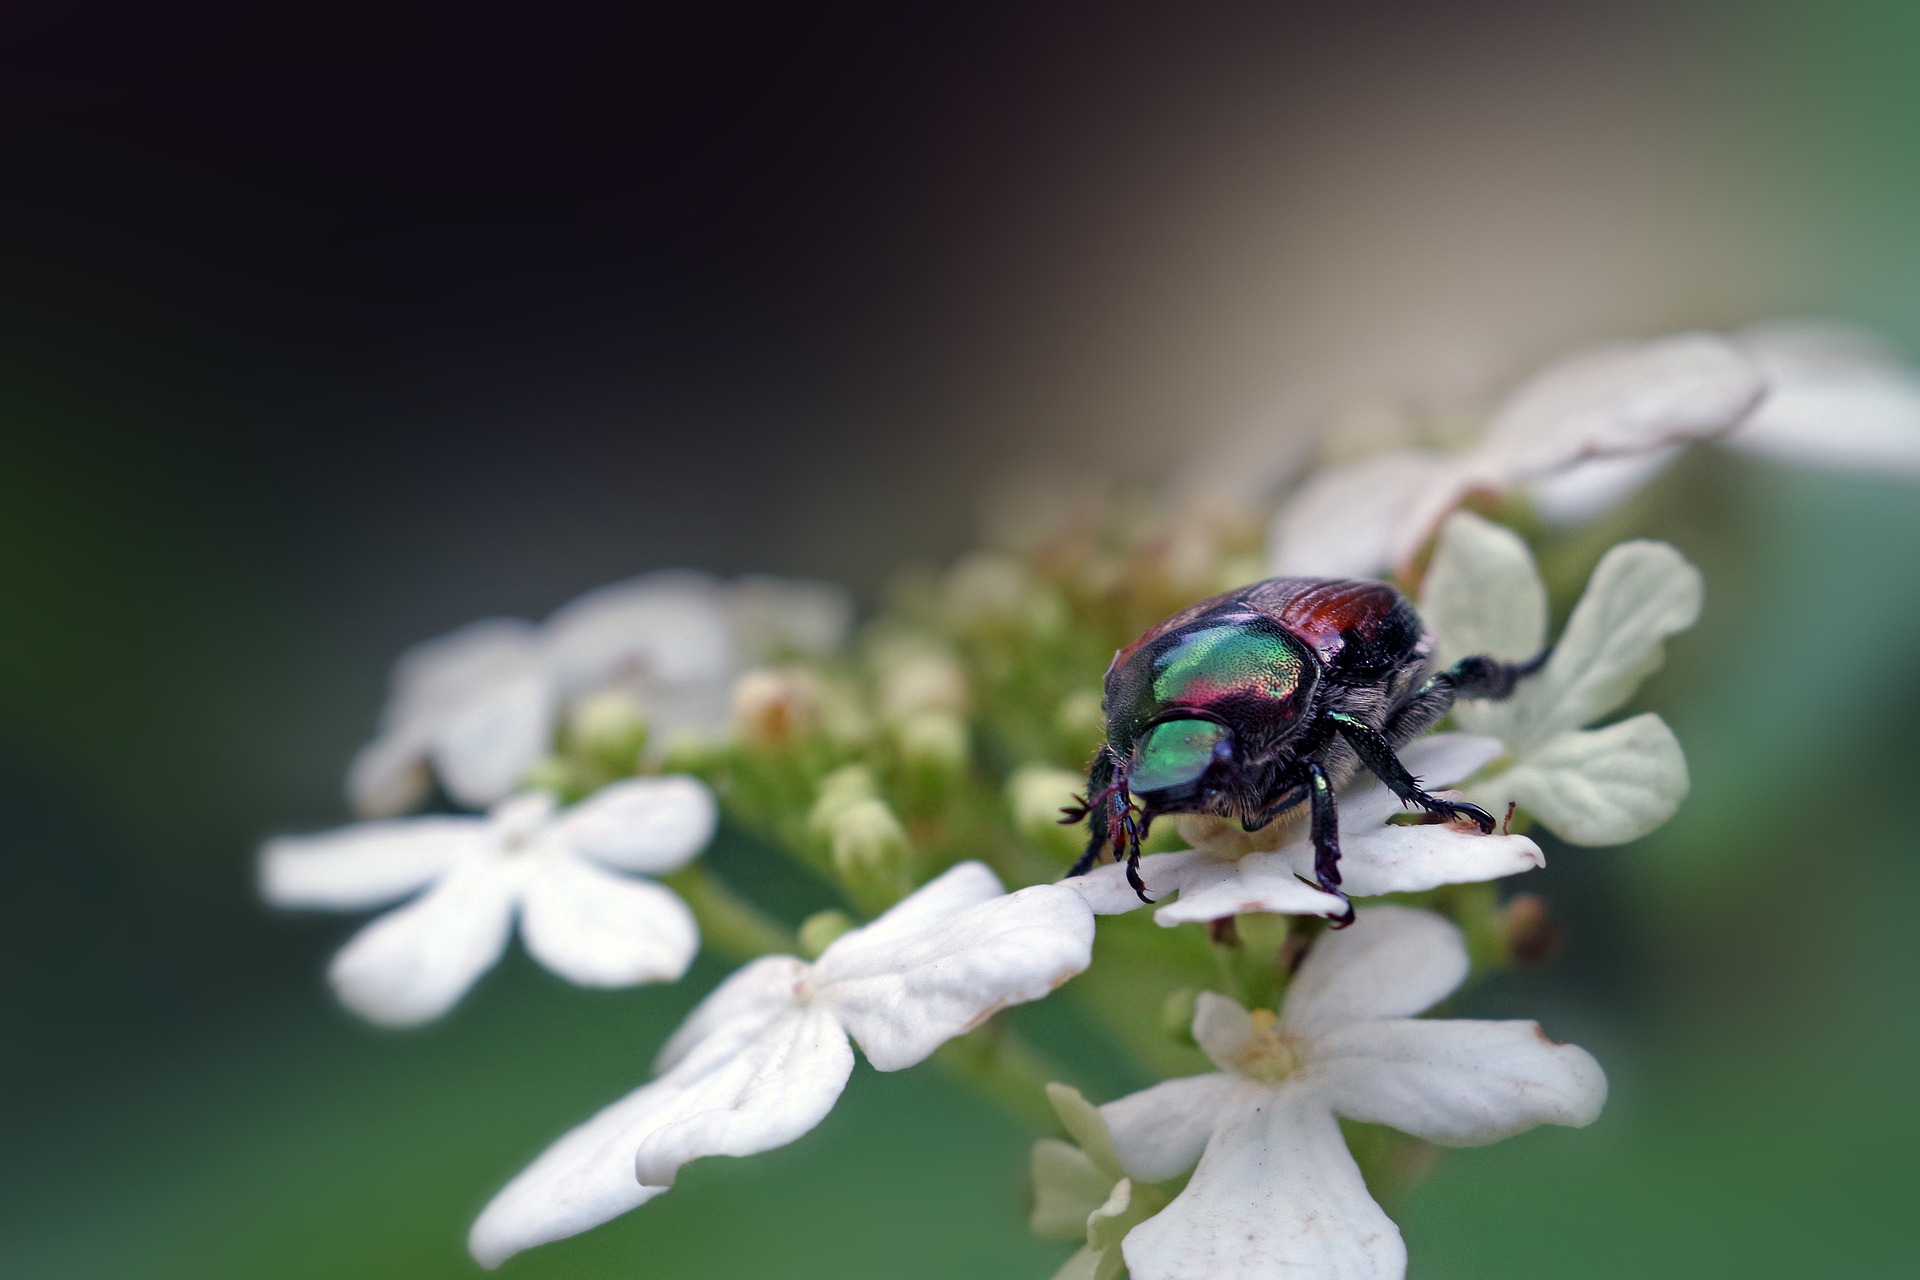 A closeup of a Japanese beetle on a flower